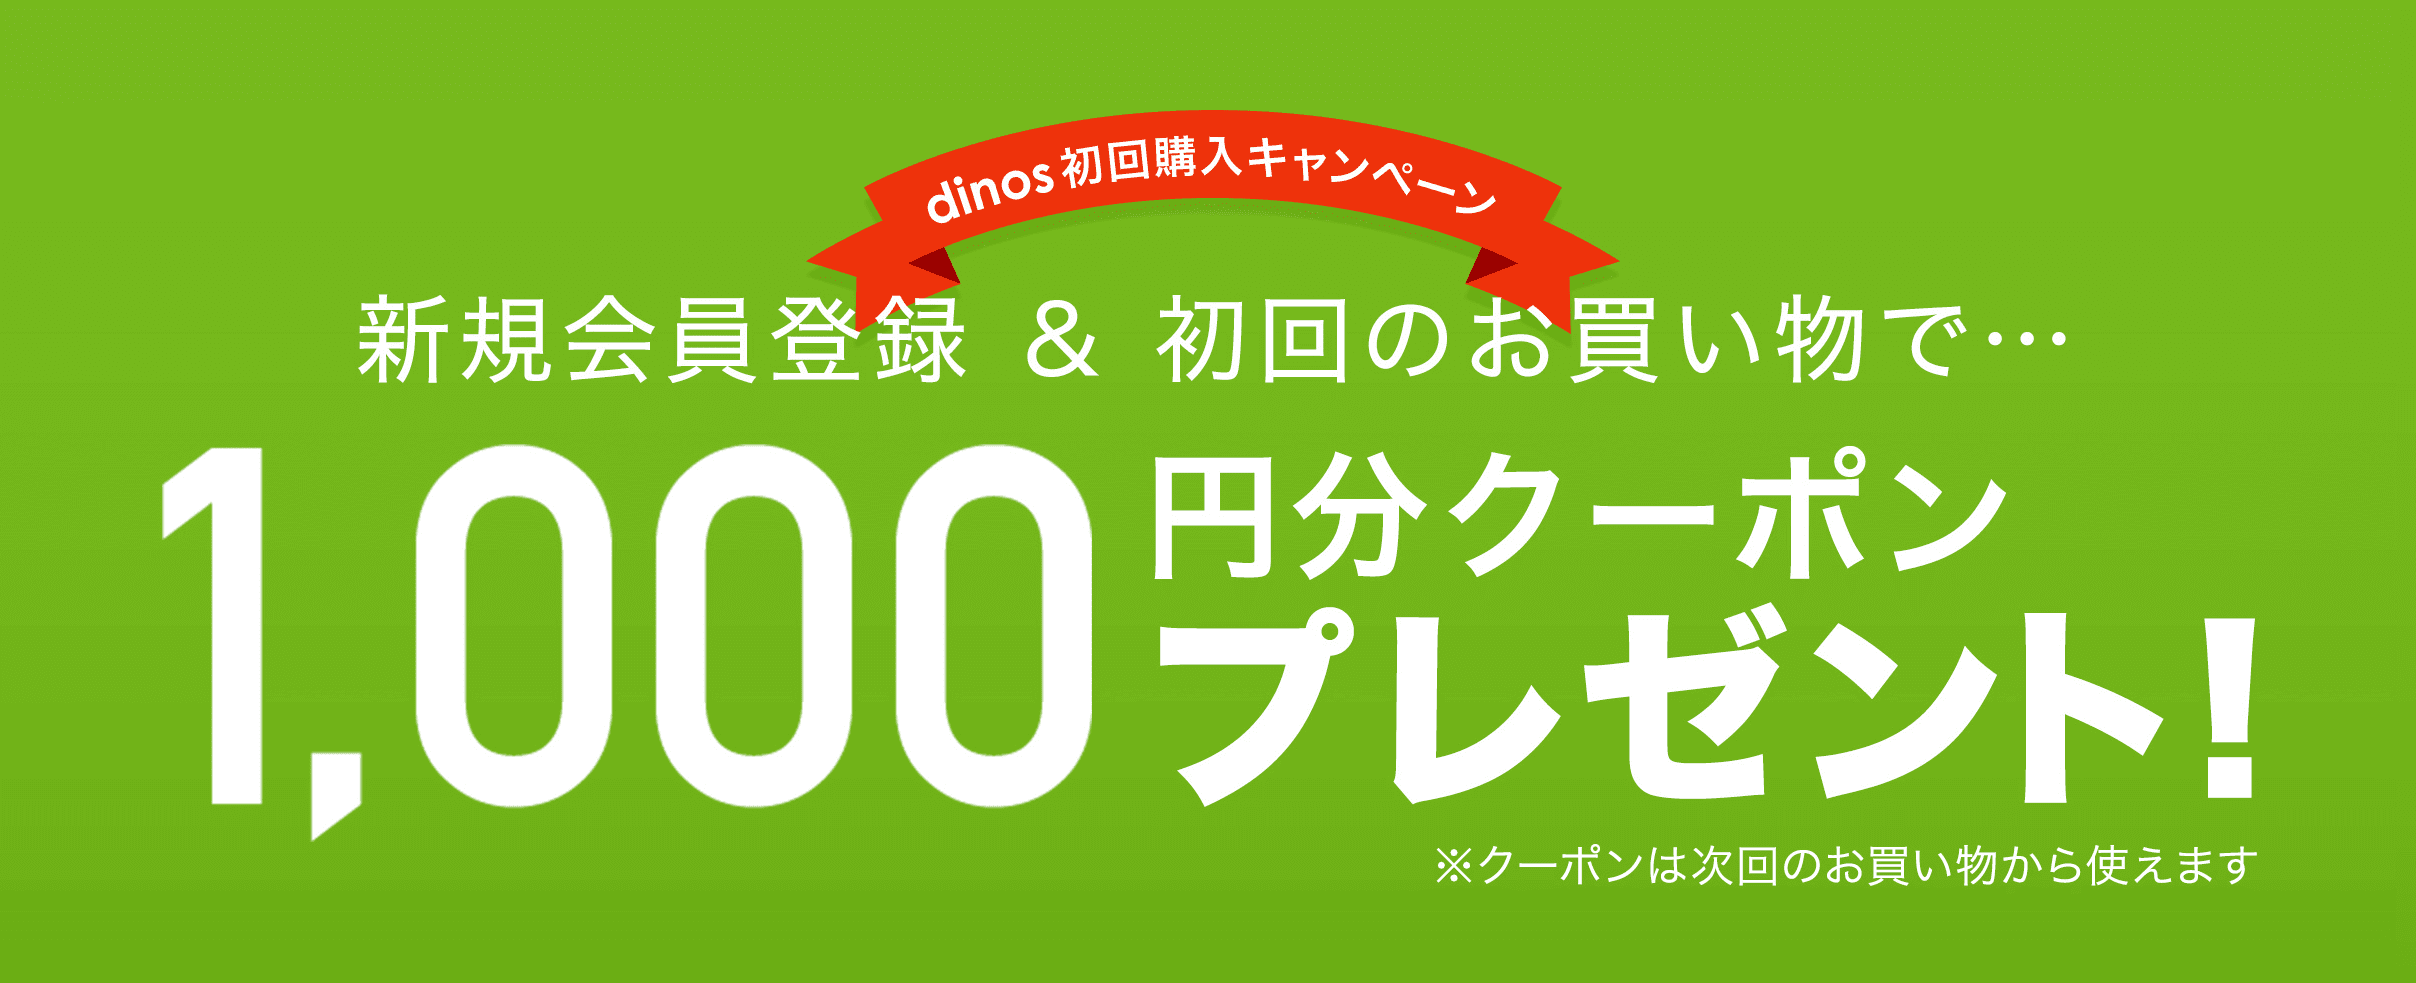 dinos(ディノス)【新規登録&初回購入限定】1000円分クーポン